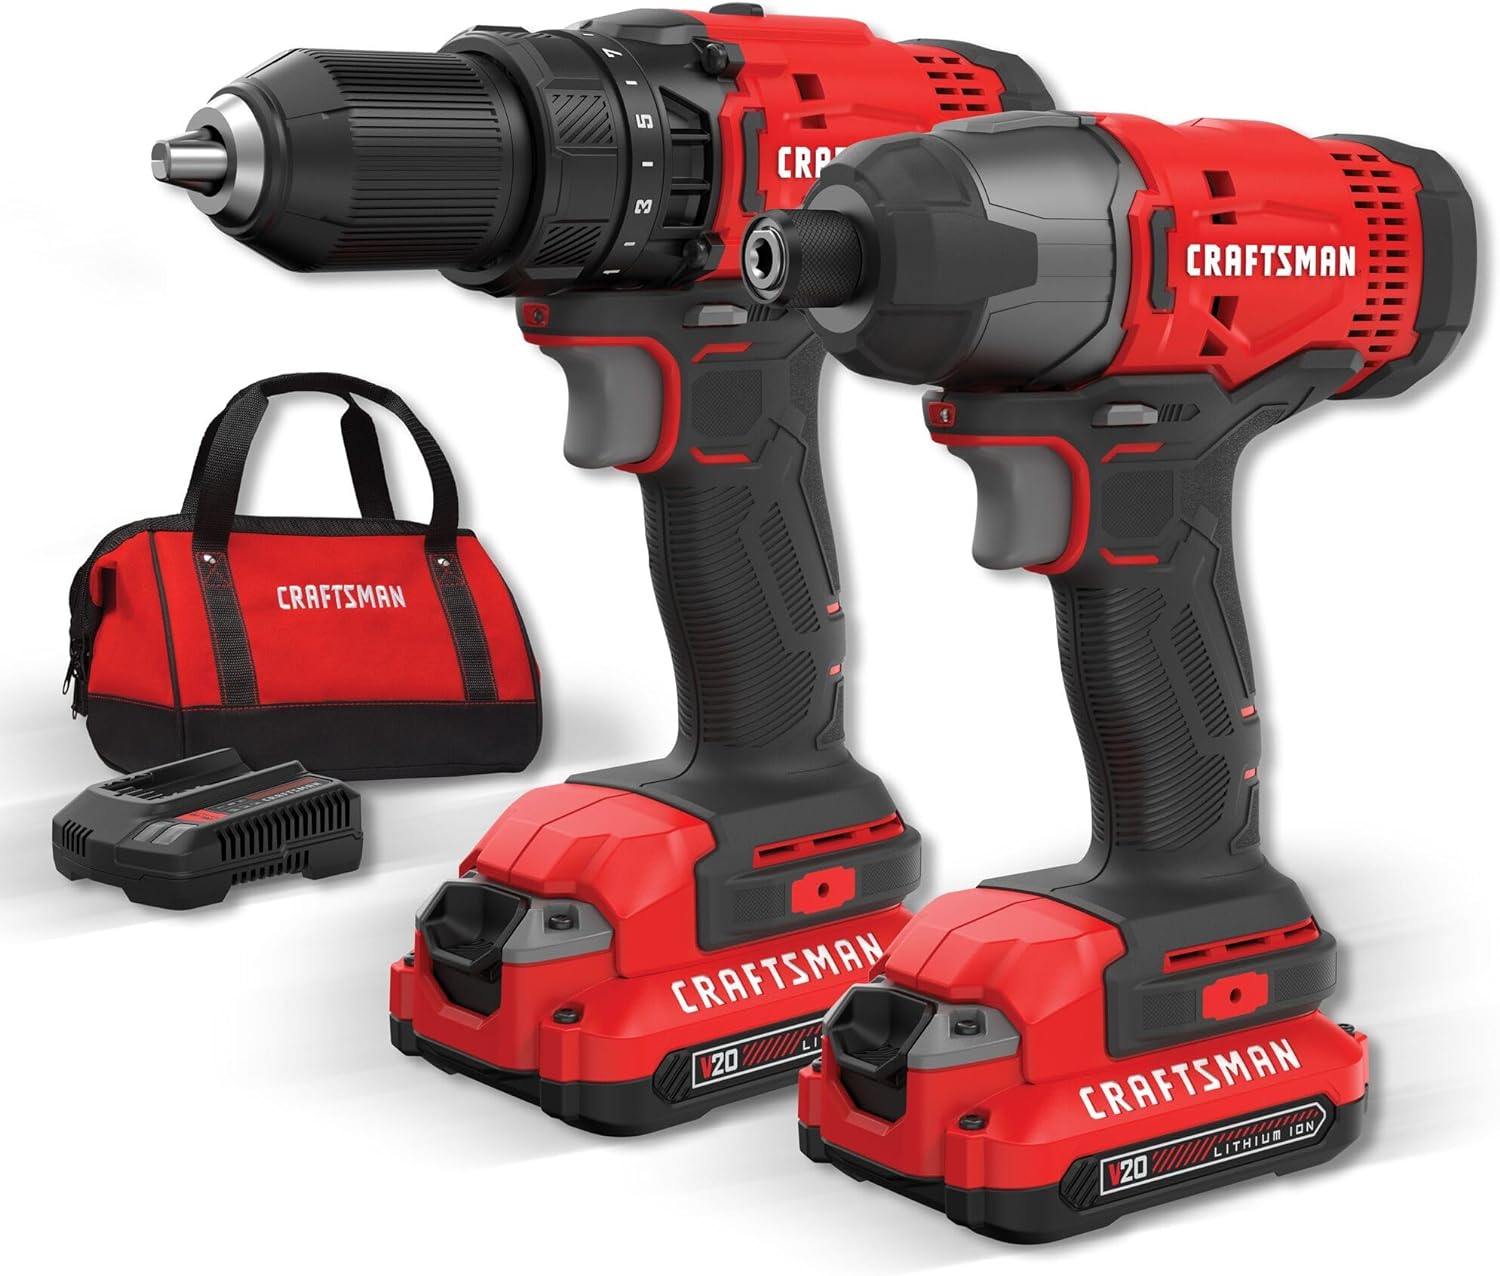 Craftsman V20 Max Cordless Drill And Impact Driver, Power Tool Combo Kit With 2 Batteries And Charger (Cmck200C2Am)